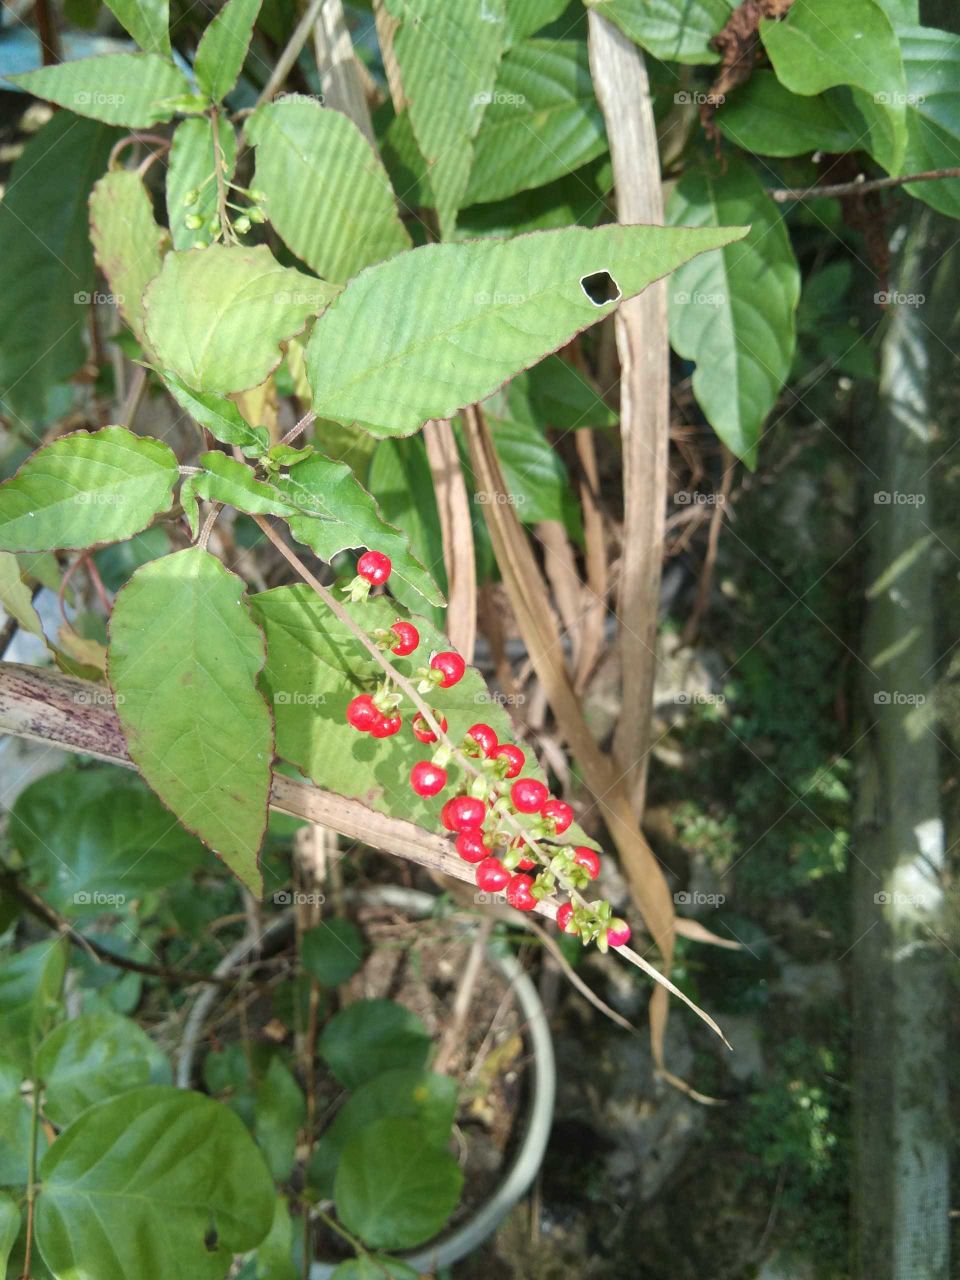 Rivina humilis / bloodberry; flowering plant species in the Petiveriaceae family. Previously placed in the pokeweed family, Phytolaccaceae. This plant also lives in Asia, especially Indonesia. (south borneo)